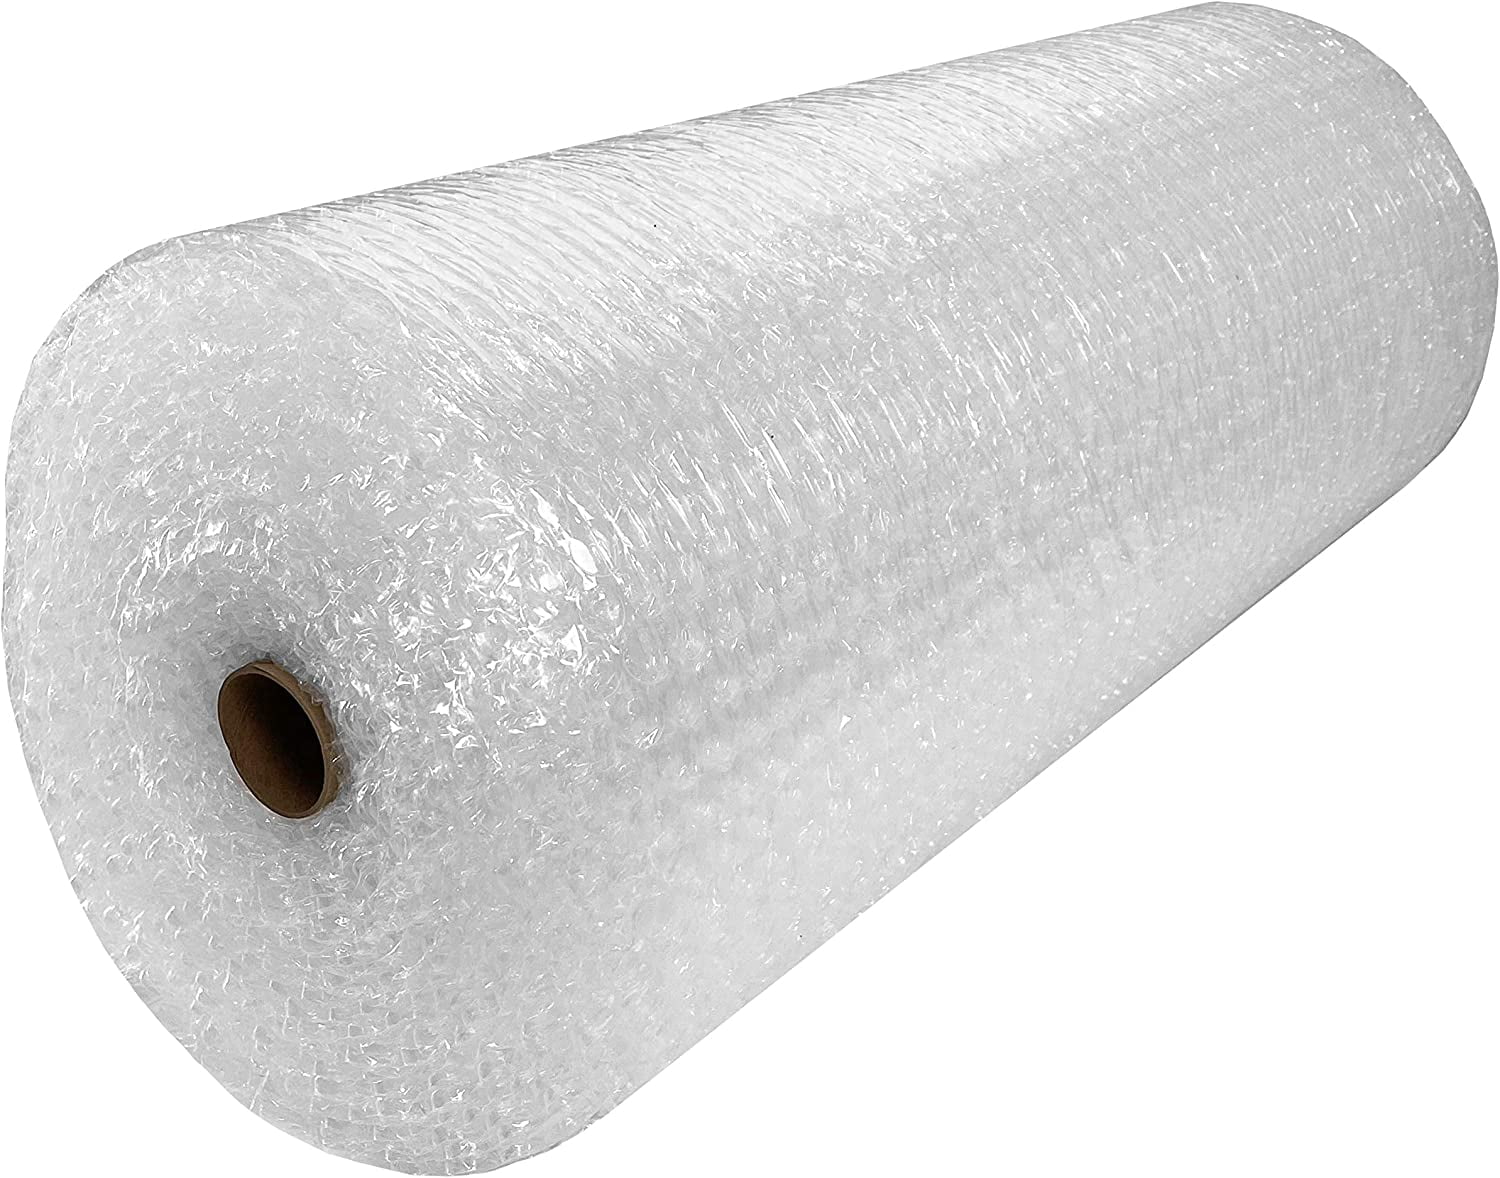 Foam wrap roll 1200mm wide x 100 meters x 2mm thick available from Access  Direct Distributors